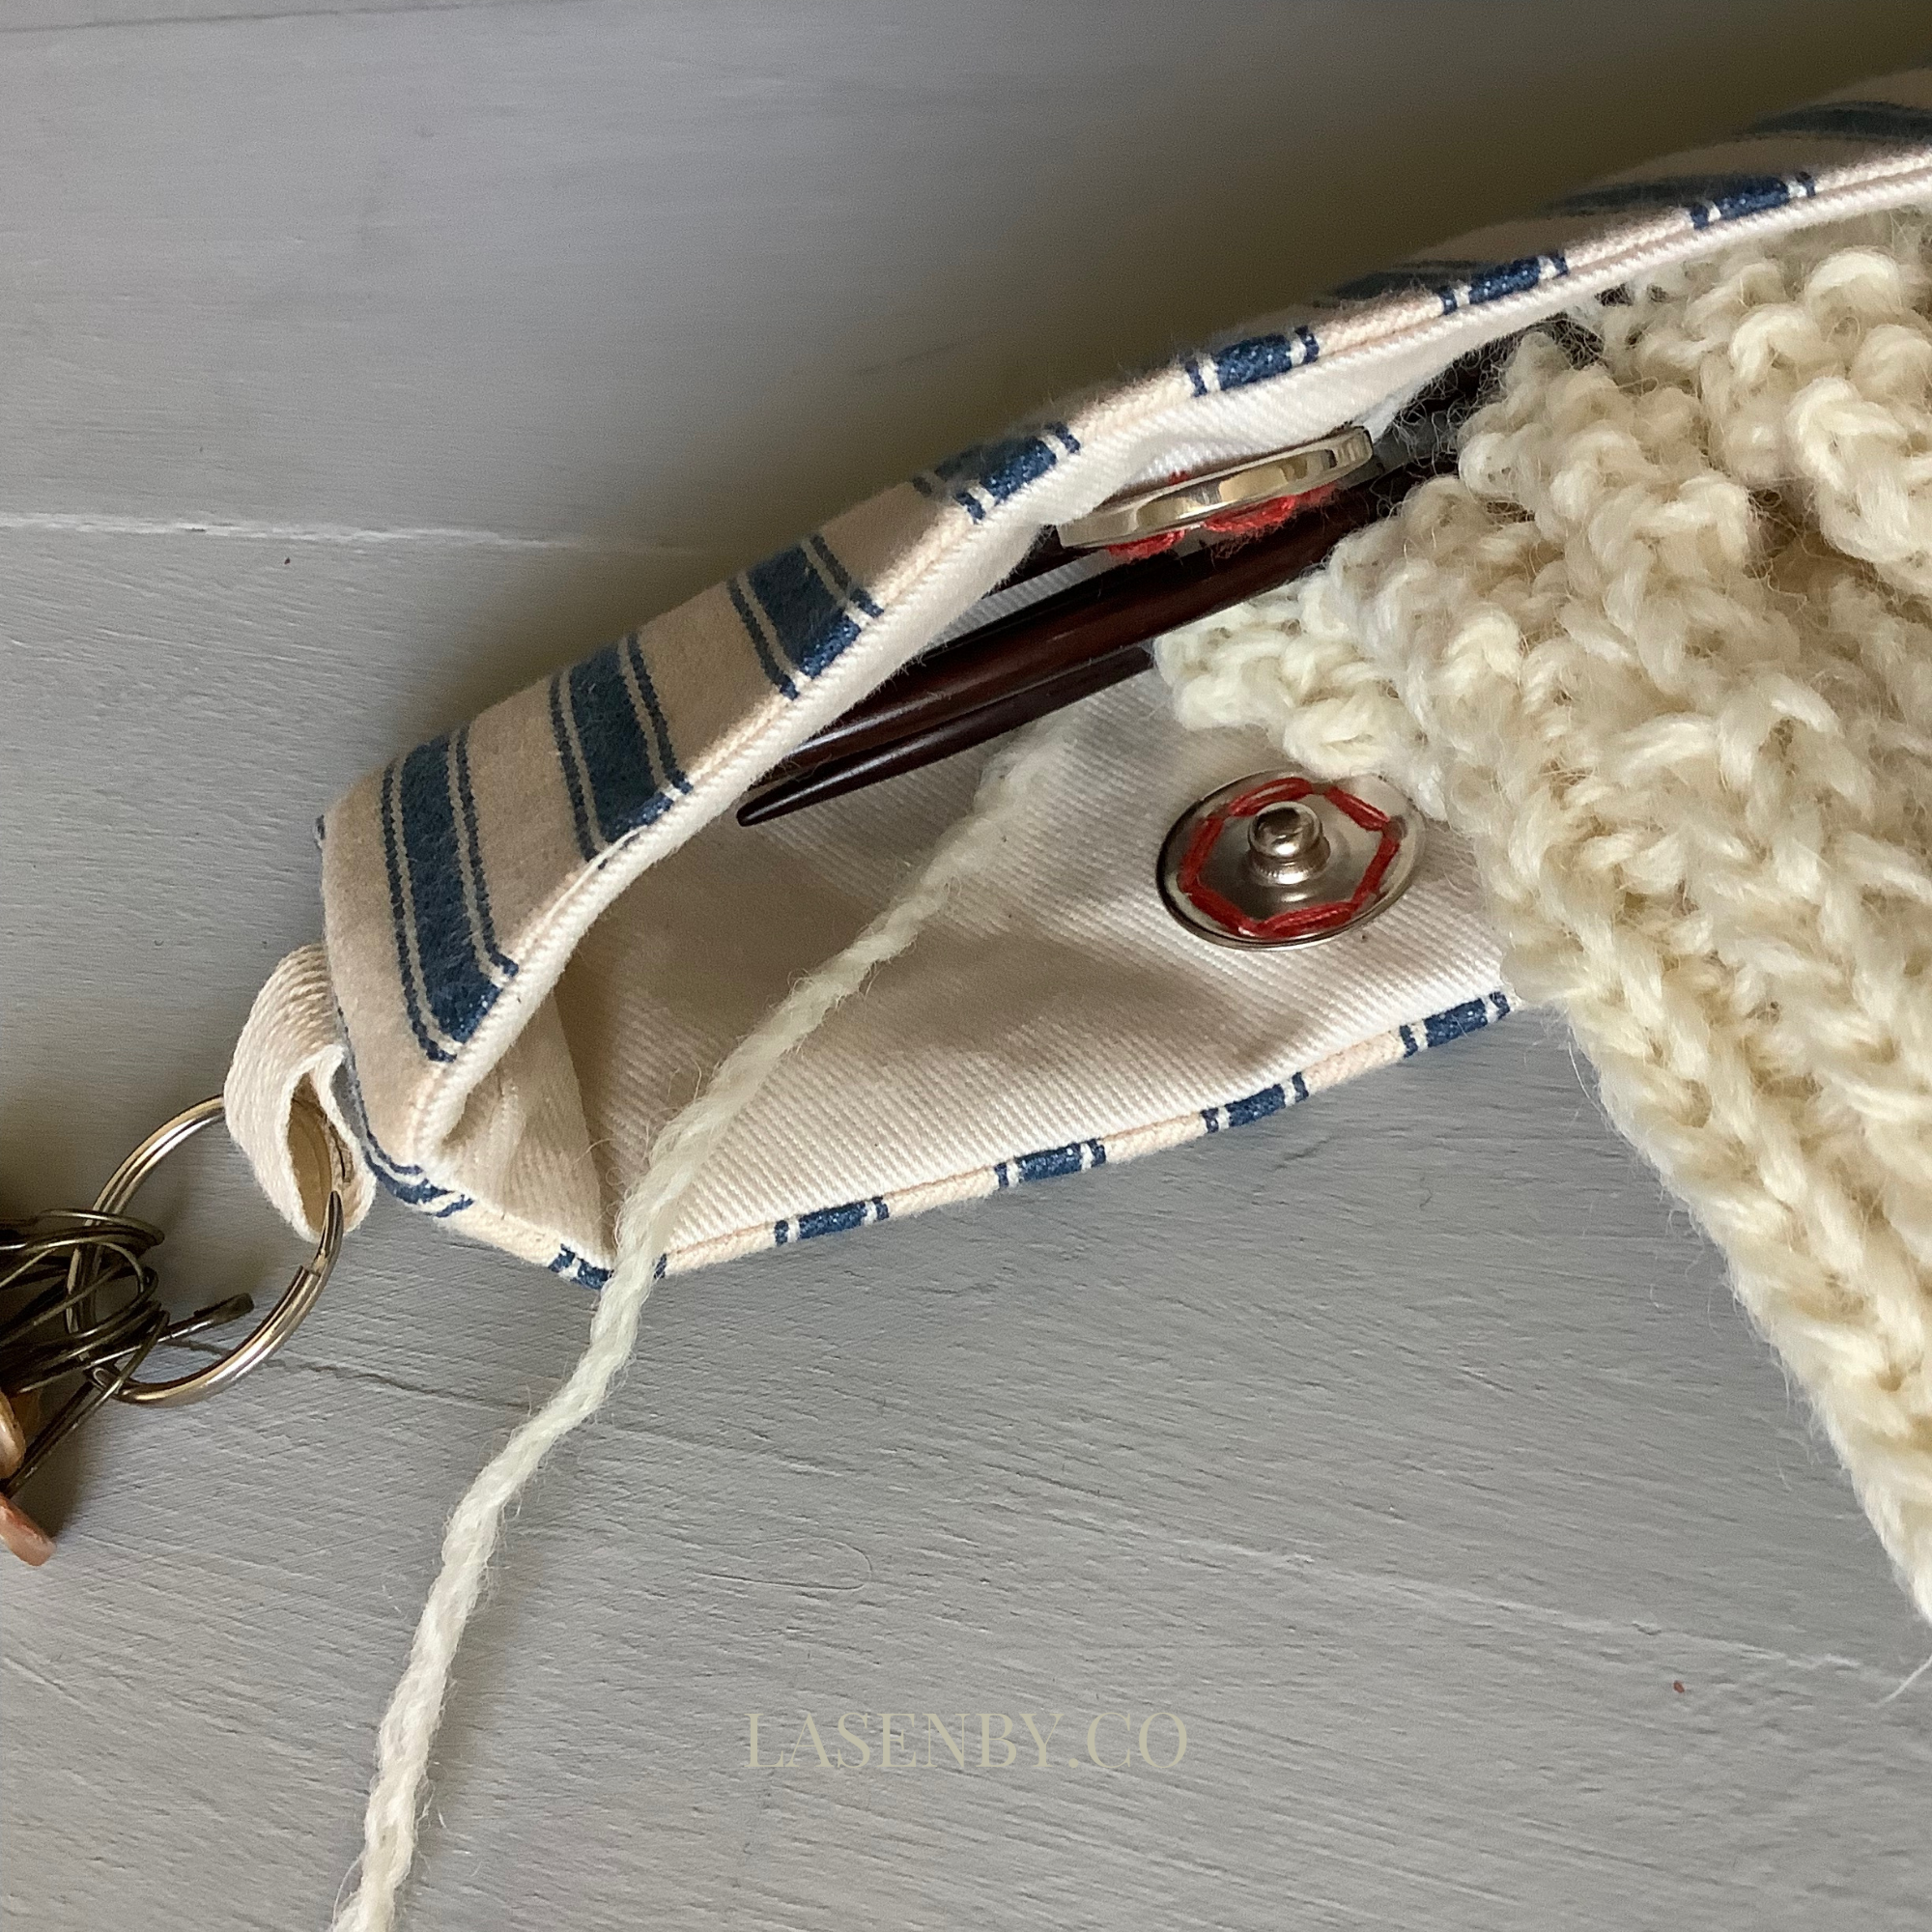 Lasenby Teasel Knitting Pouch (free)